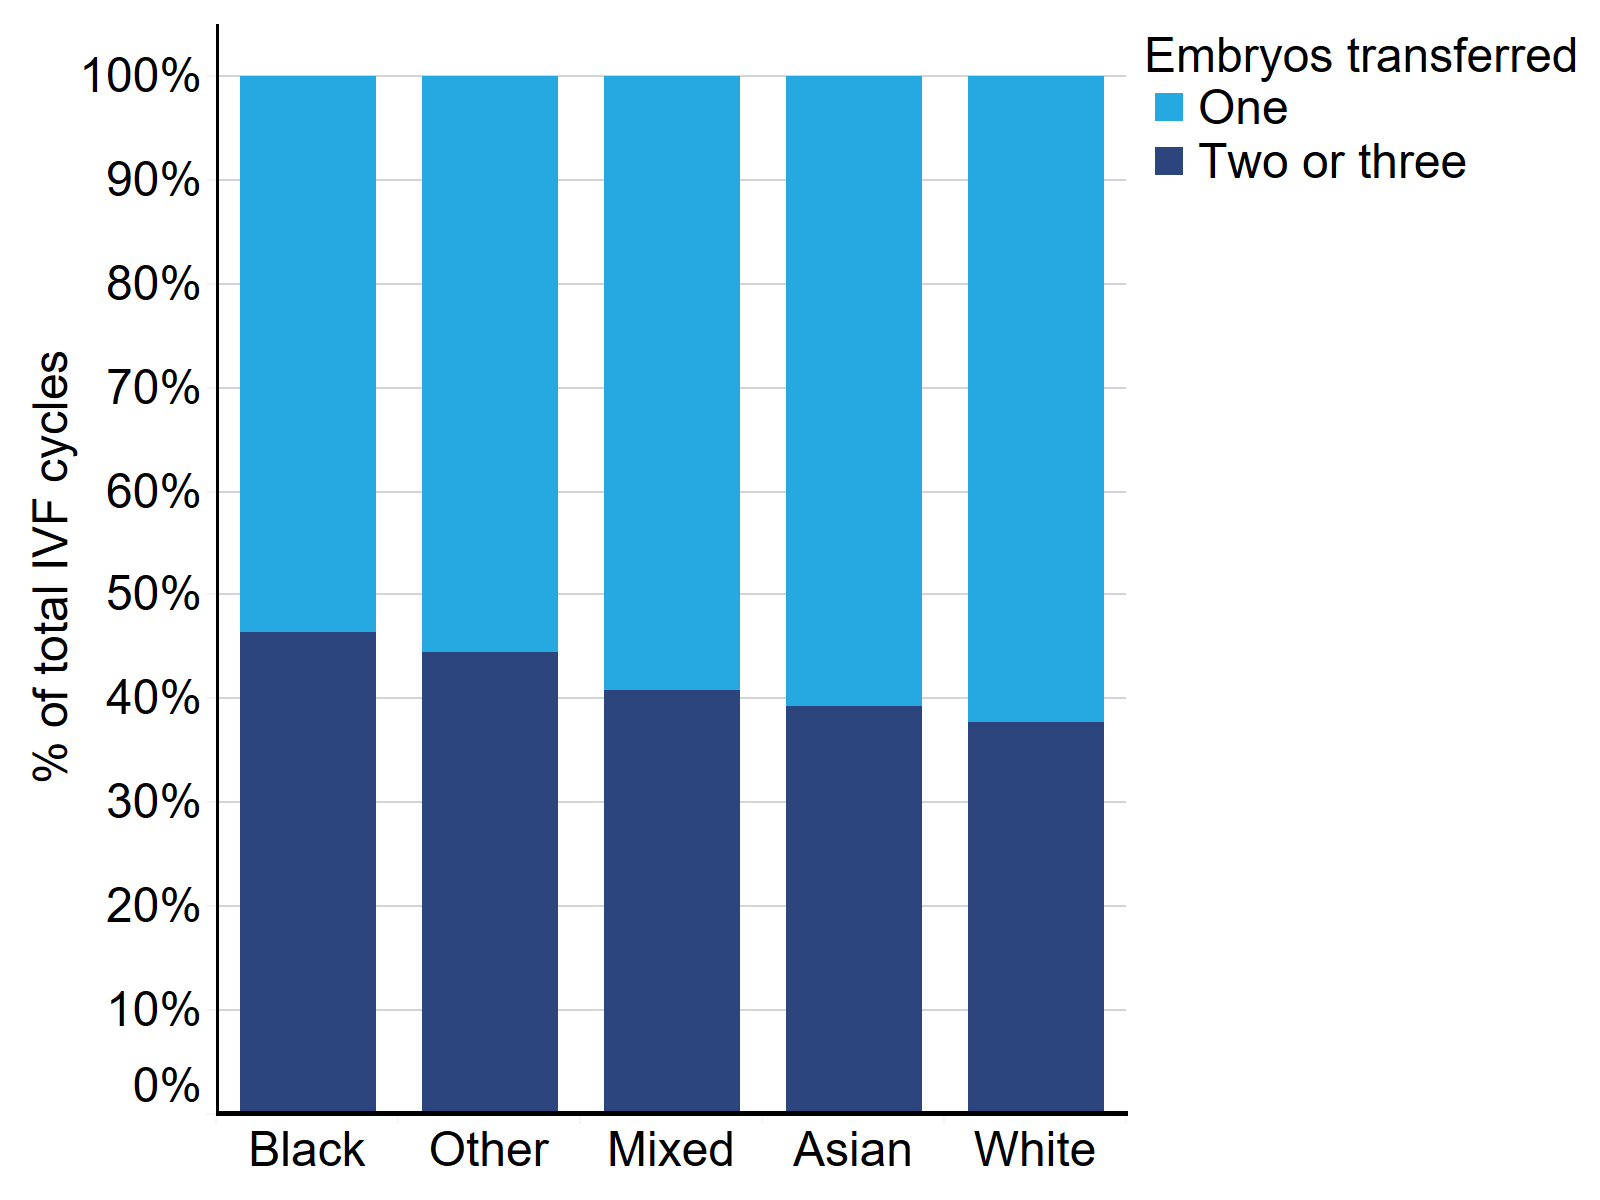 Proportion of single and multiple embryo transfers by patient ethnic groups, 2014-2018. The stacked bar chart shows proportion of cycles in which either one embryo or two/three embryos were transferred for each ethnic group. All ethnic groups had more single embryo transfers than multiple embryo transfers. Black patients had the largest proportion of multiple embryo transfers (46% of all cycles) followed by Other (45%), Mixed (41%), Asian (39%) and White (38%).